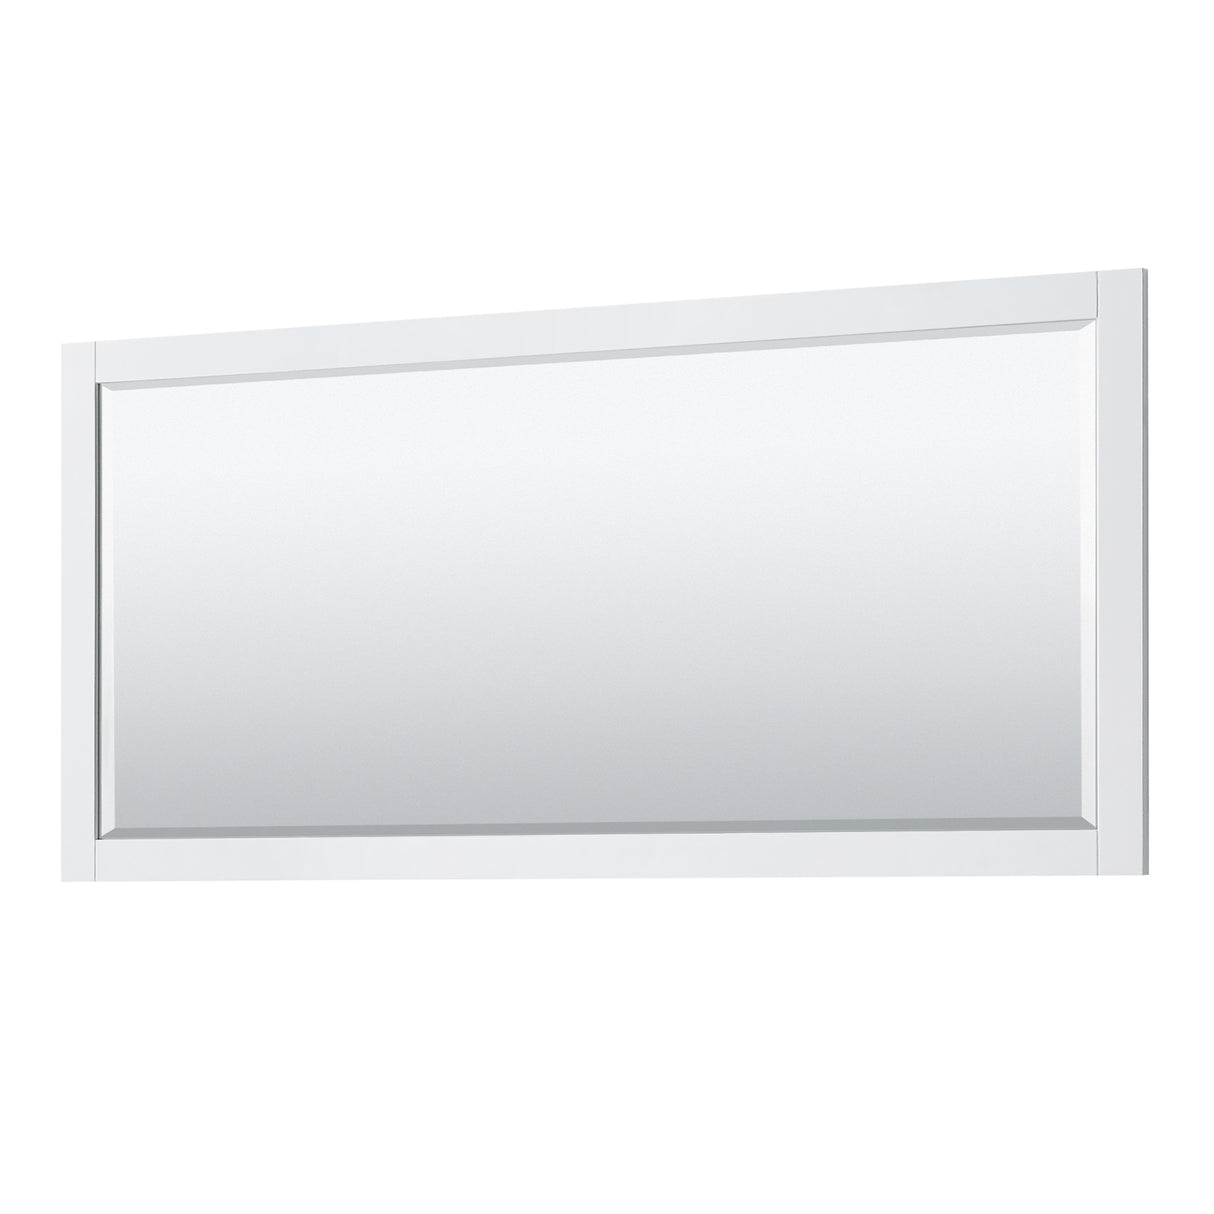 Avery 72 Inch Double Bathroom Vanity in White White Carrara Marble Countertop Undermount Oval Sinks and 70 Inch Mirror